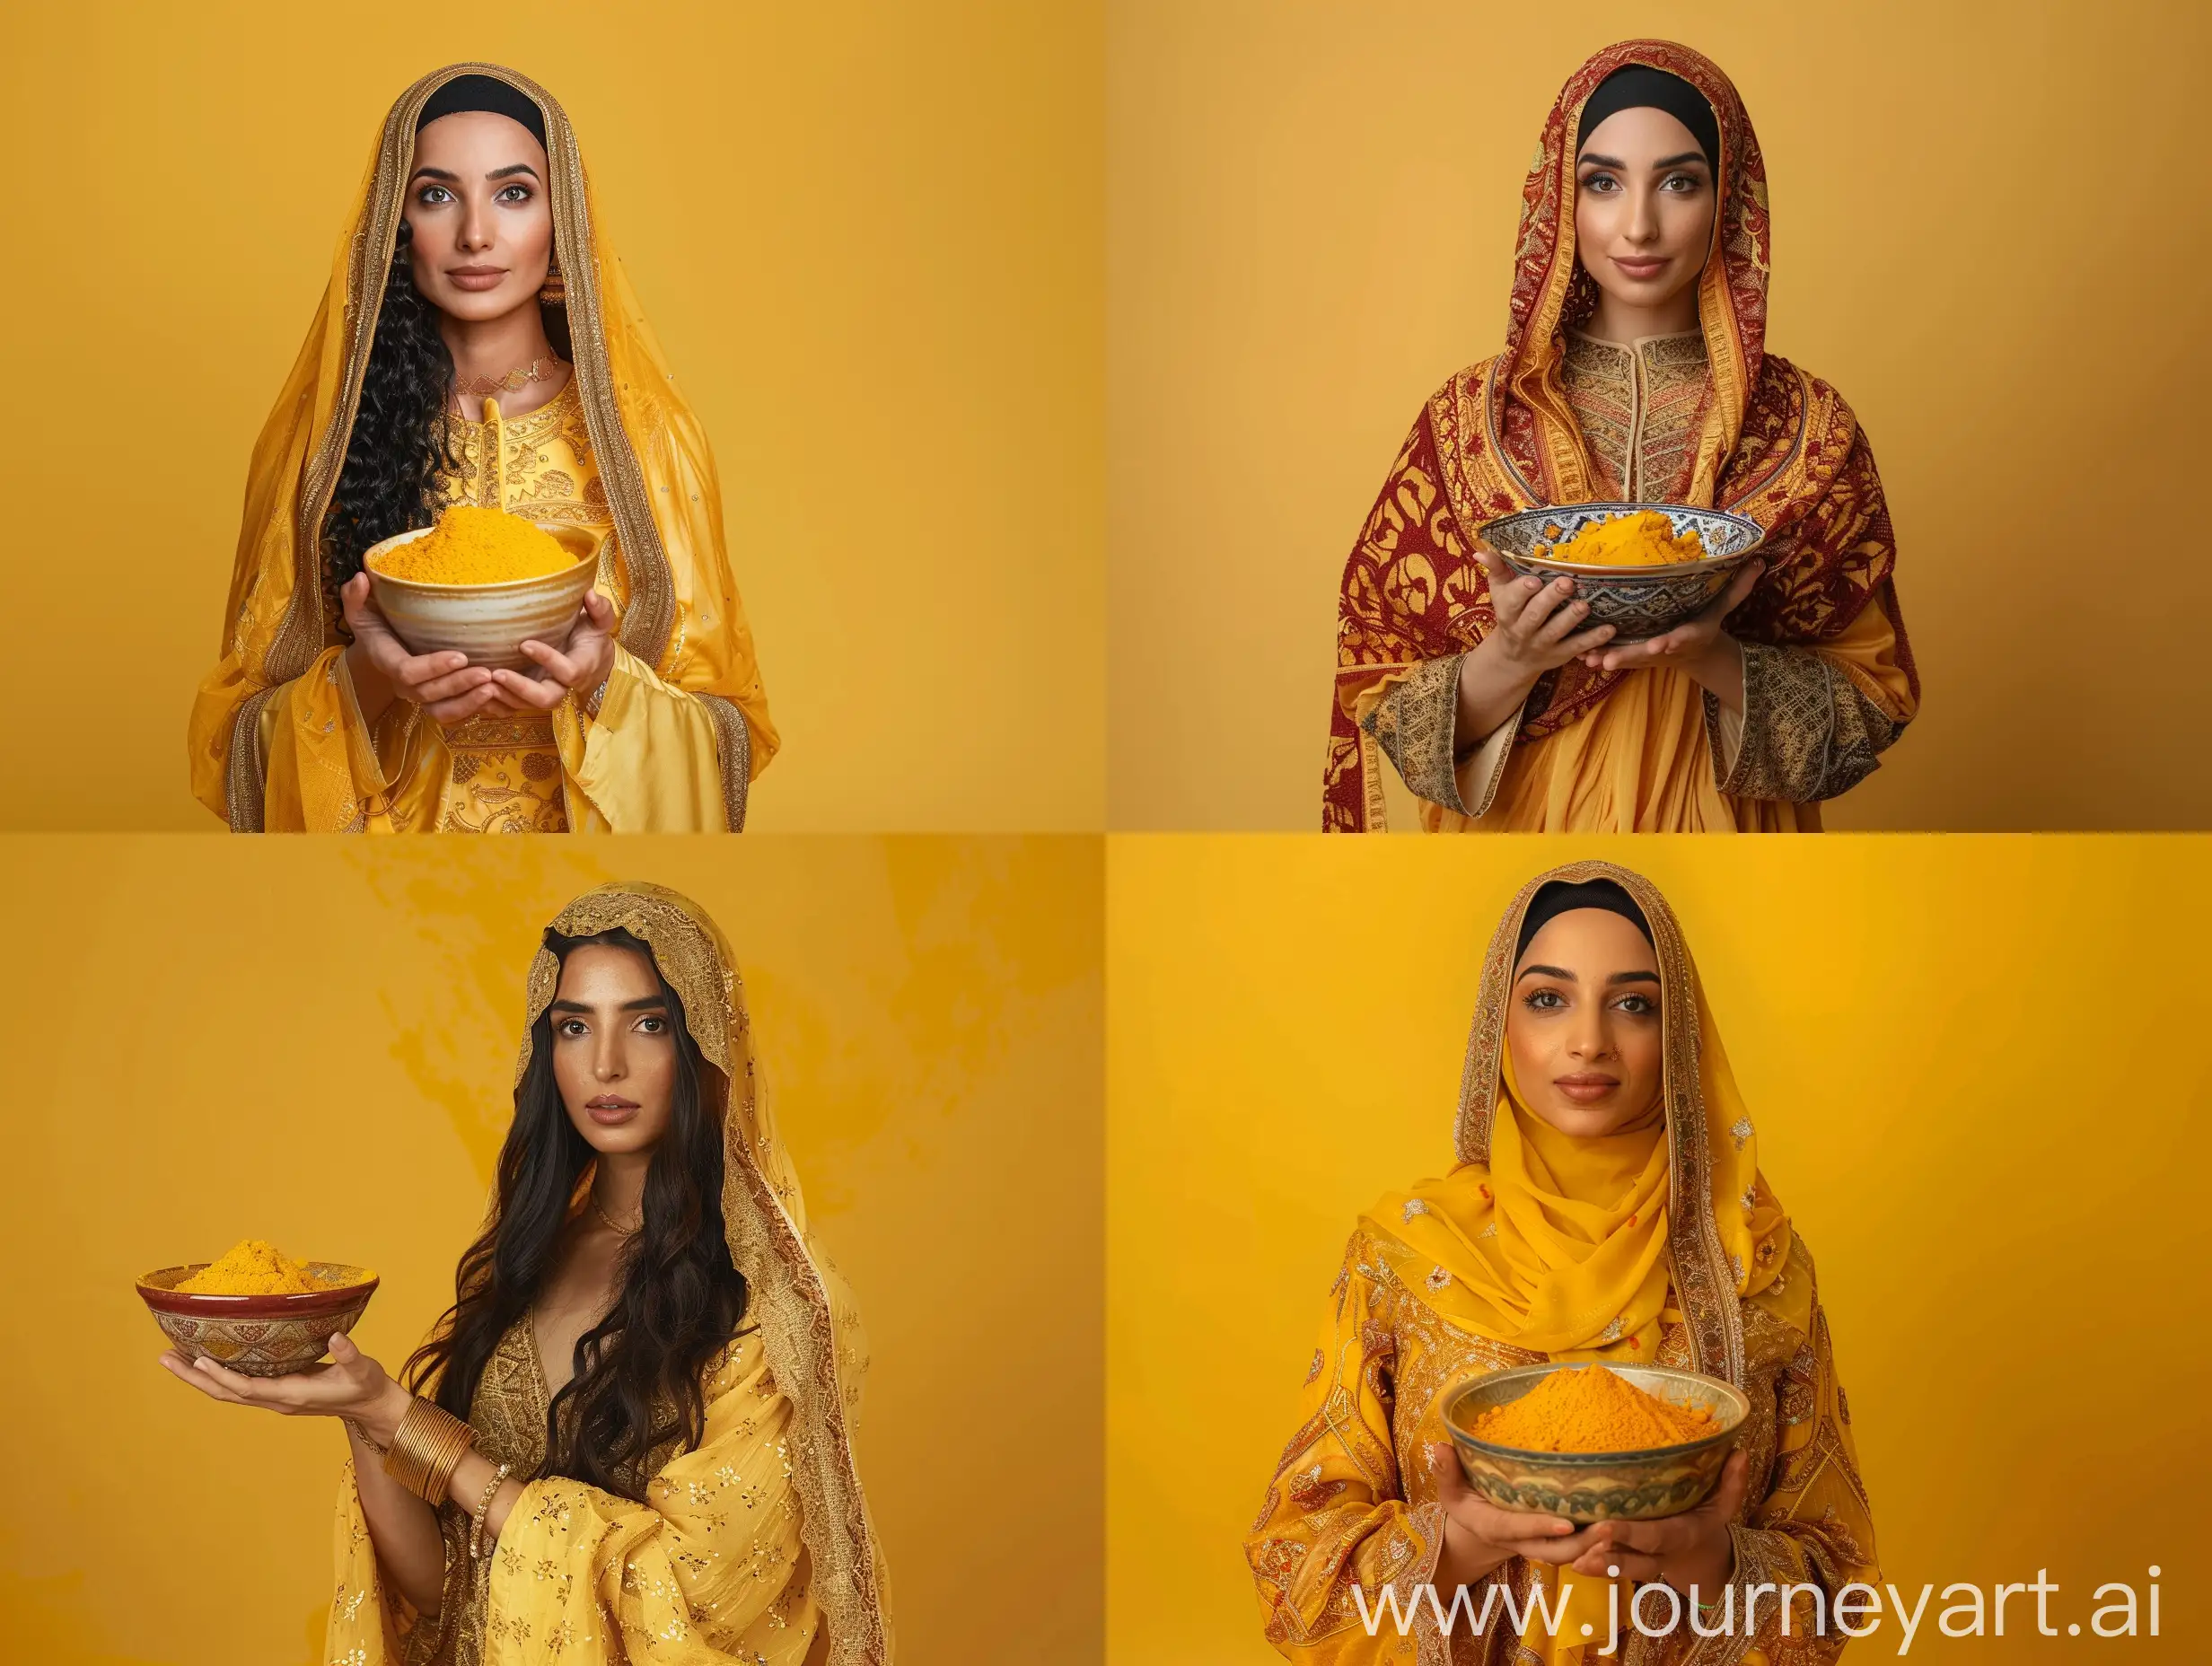 Arabic-Woman-Holding-Bowl-of-Turmeric-on-Vibrant-Yellow-Background